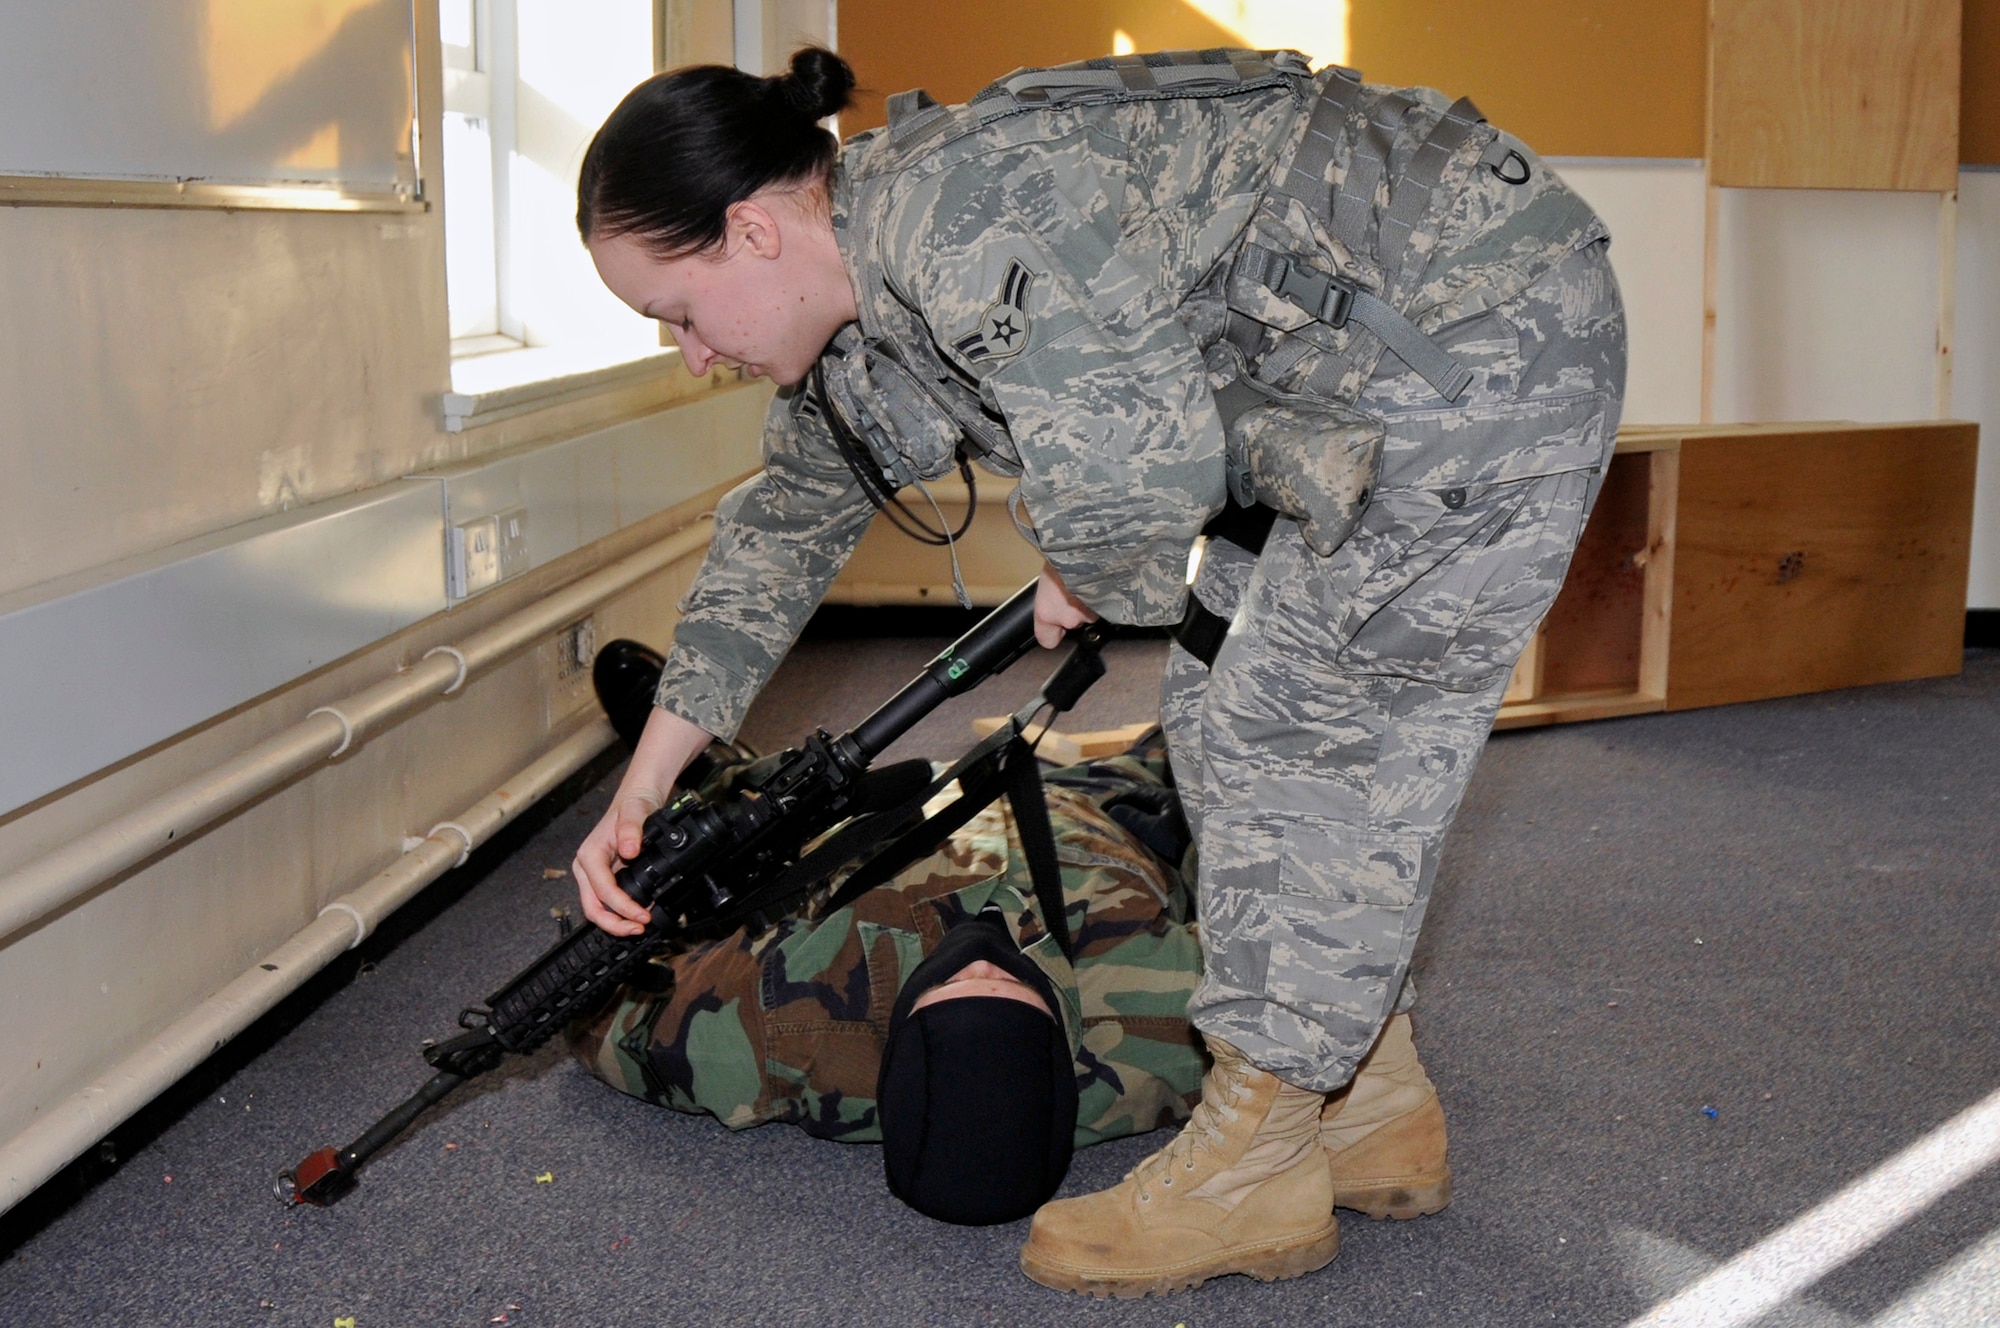 After subduing a simulated gunman, Airman 1st Class Kristen Brousseau, 48th Security Forces Squadron disarms the gunman March 4, 2009 at RAF Feltwell, England. The Airmen are participating in a "Active Shooter" scenario which teaches security forces Airmen how to handle a school shooting. (U.S. Air Force photo by Airman 1st Class Perry Aston)